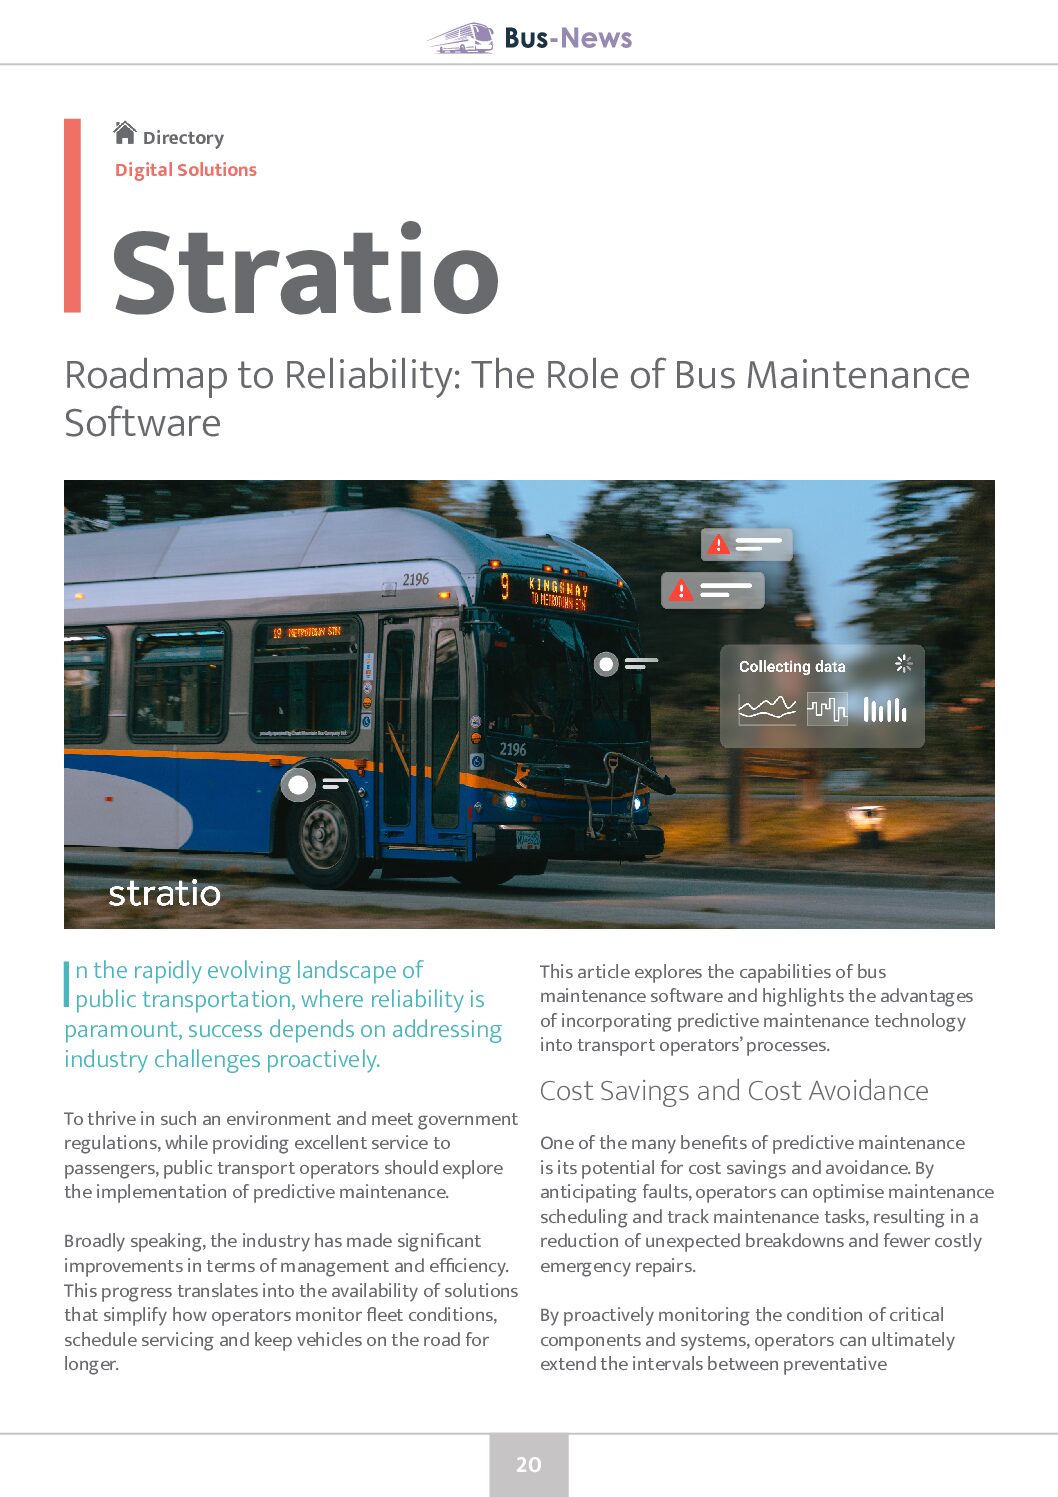 Roadmap to Reliability: The Role of Bus Maintenance Software